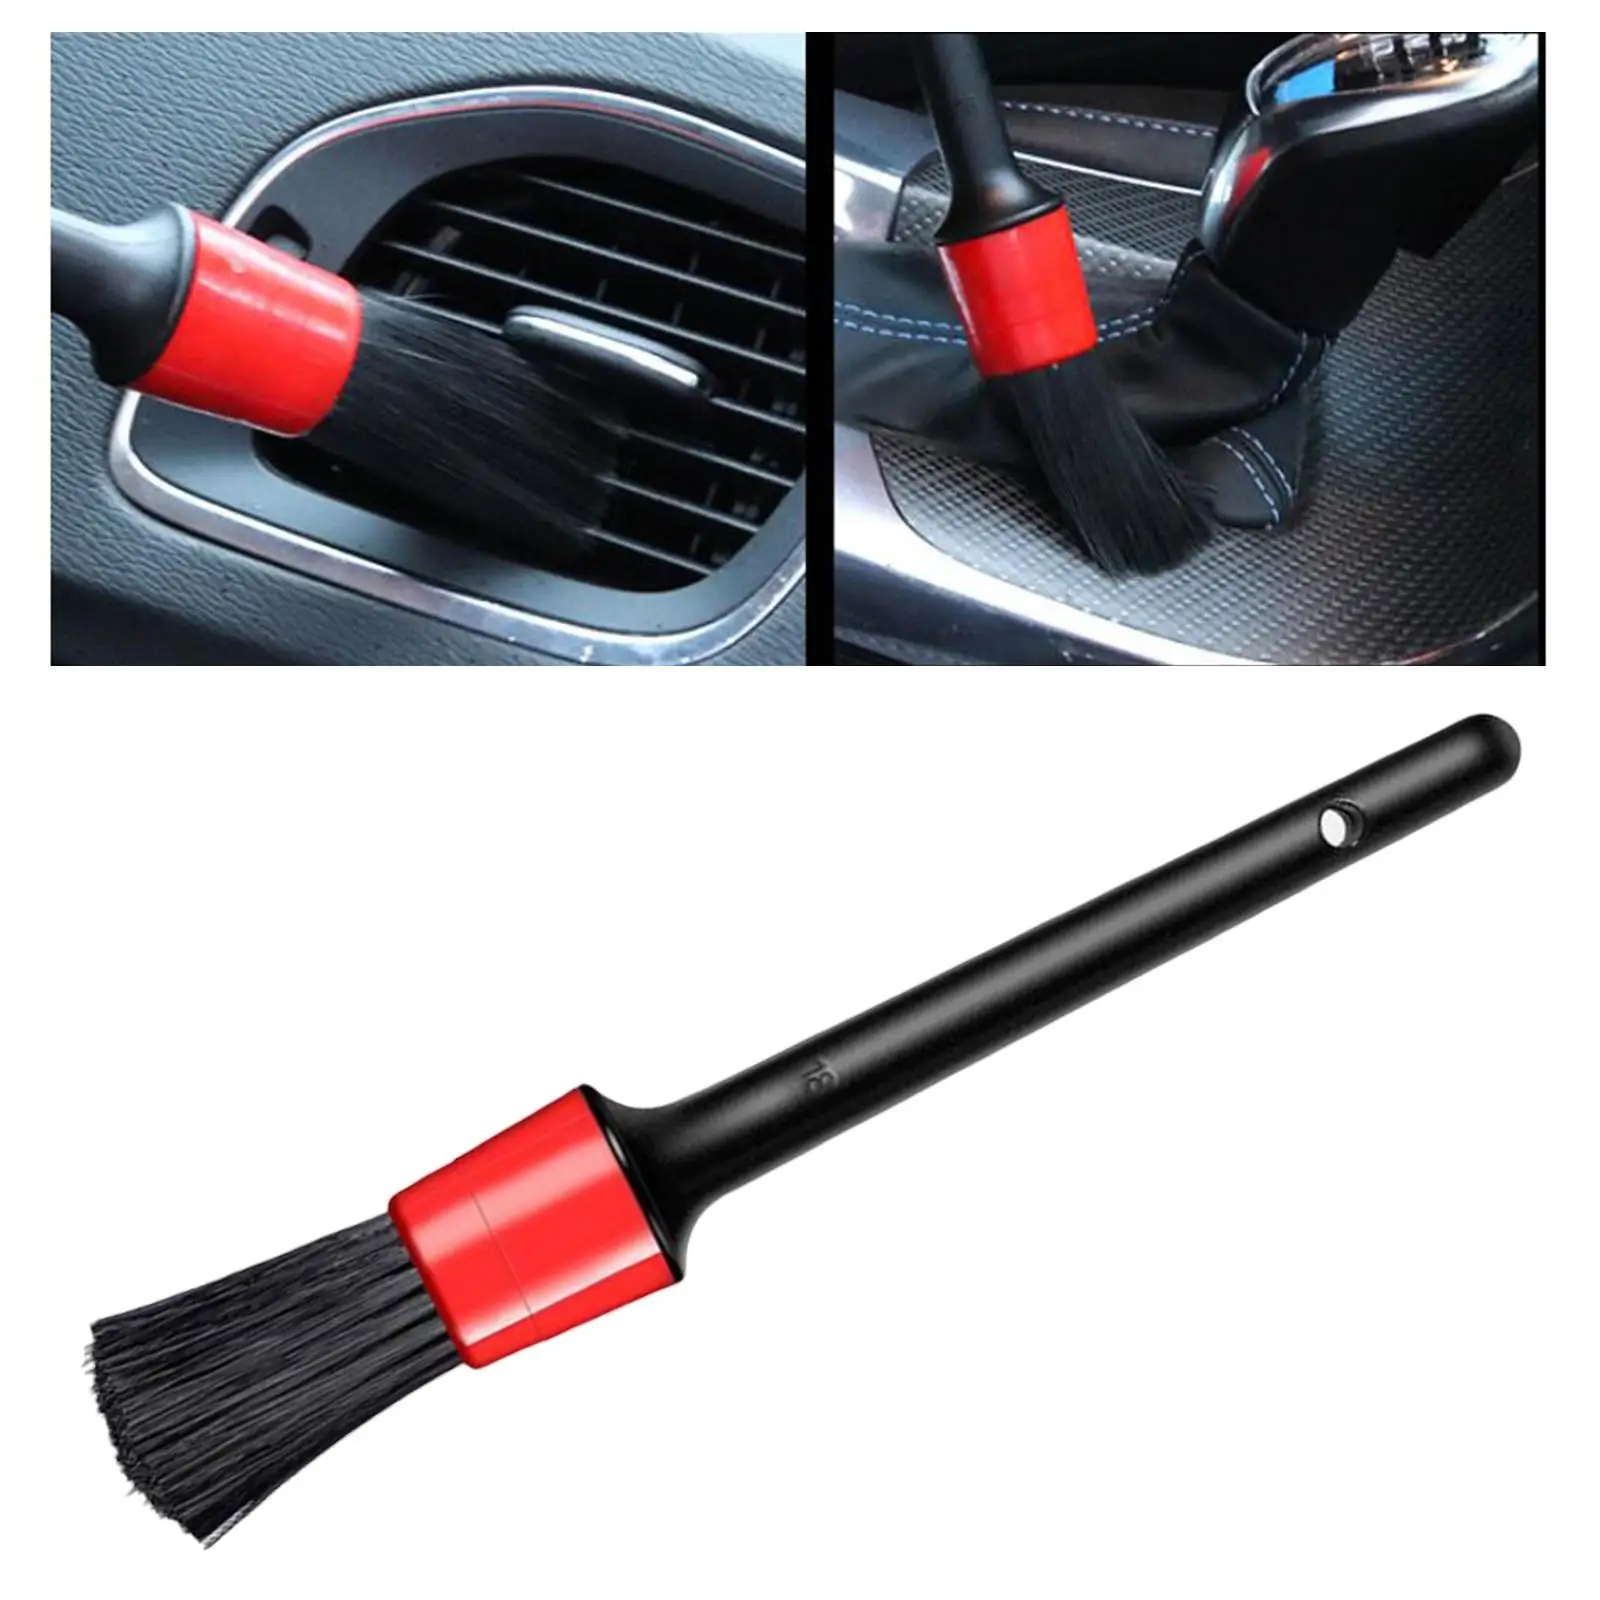 2xCar Detail Brush Accessories for Interior Exterior Leather